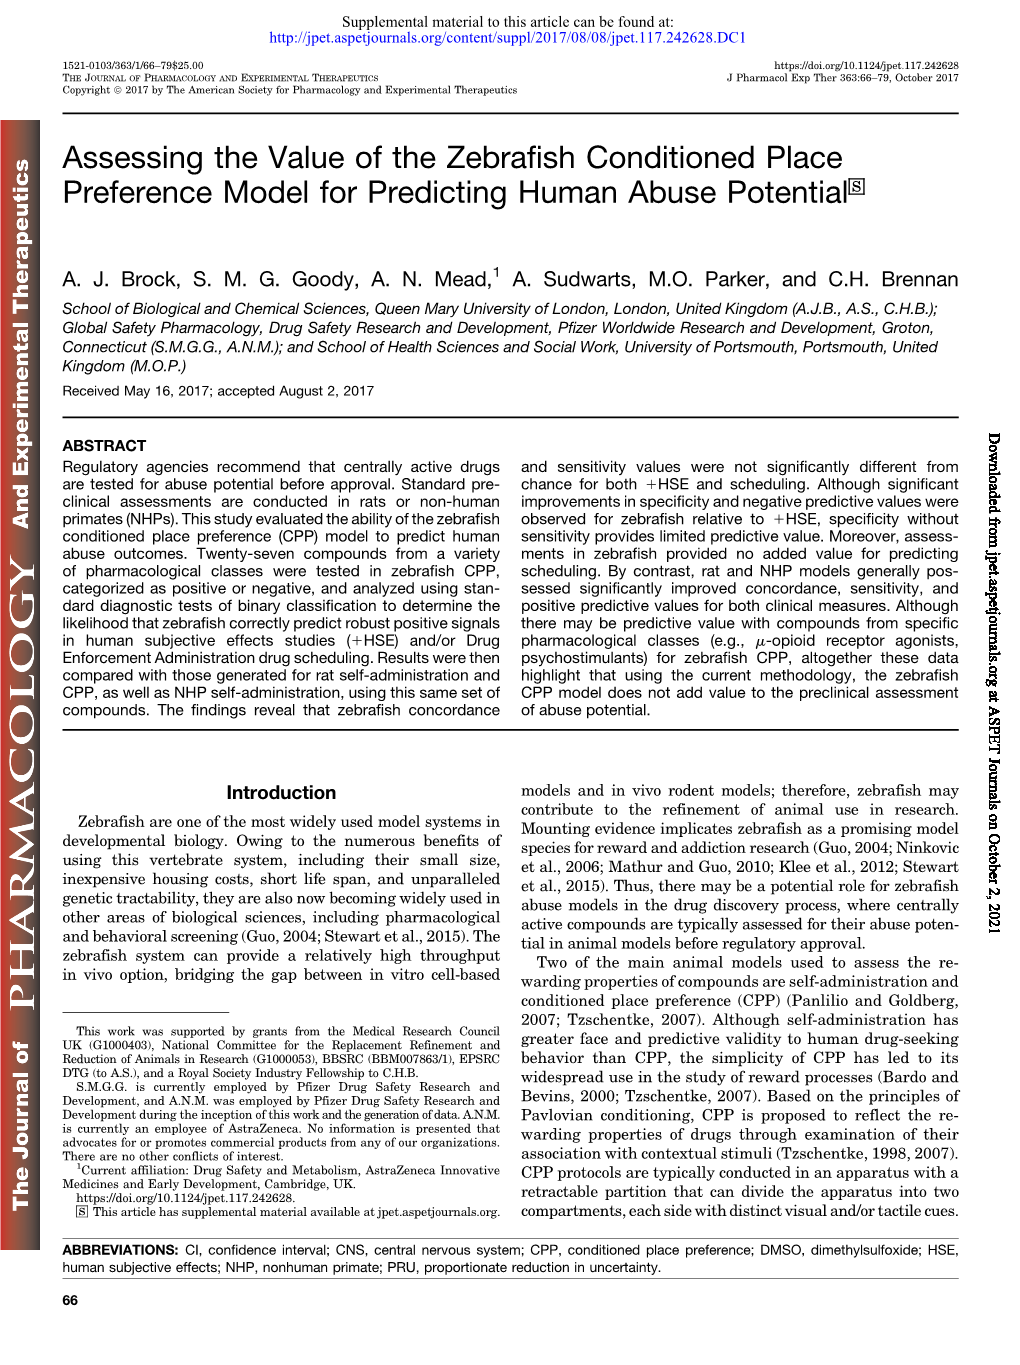 Assessing the Value of the Zebrafish Conditioned Place Preference Model for Predicting Human Abuse Potential S